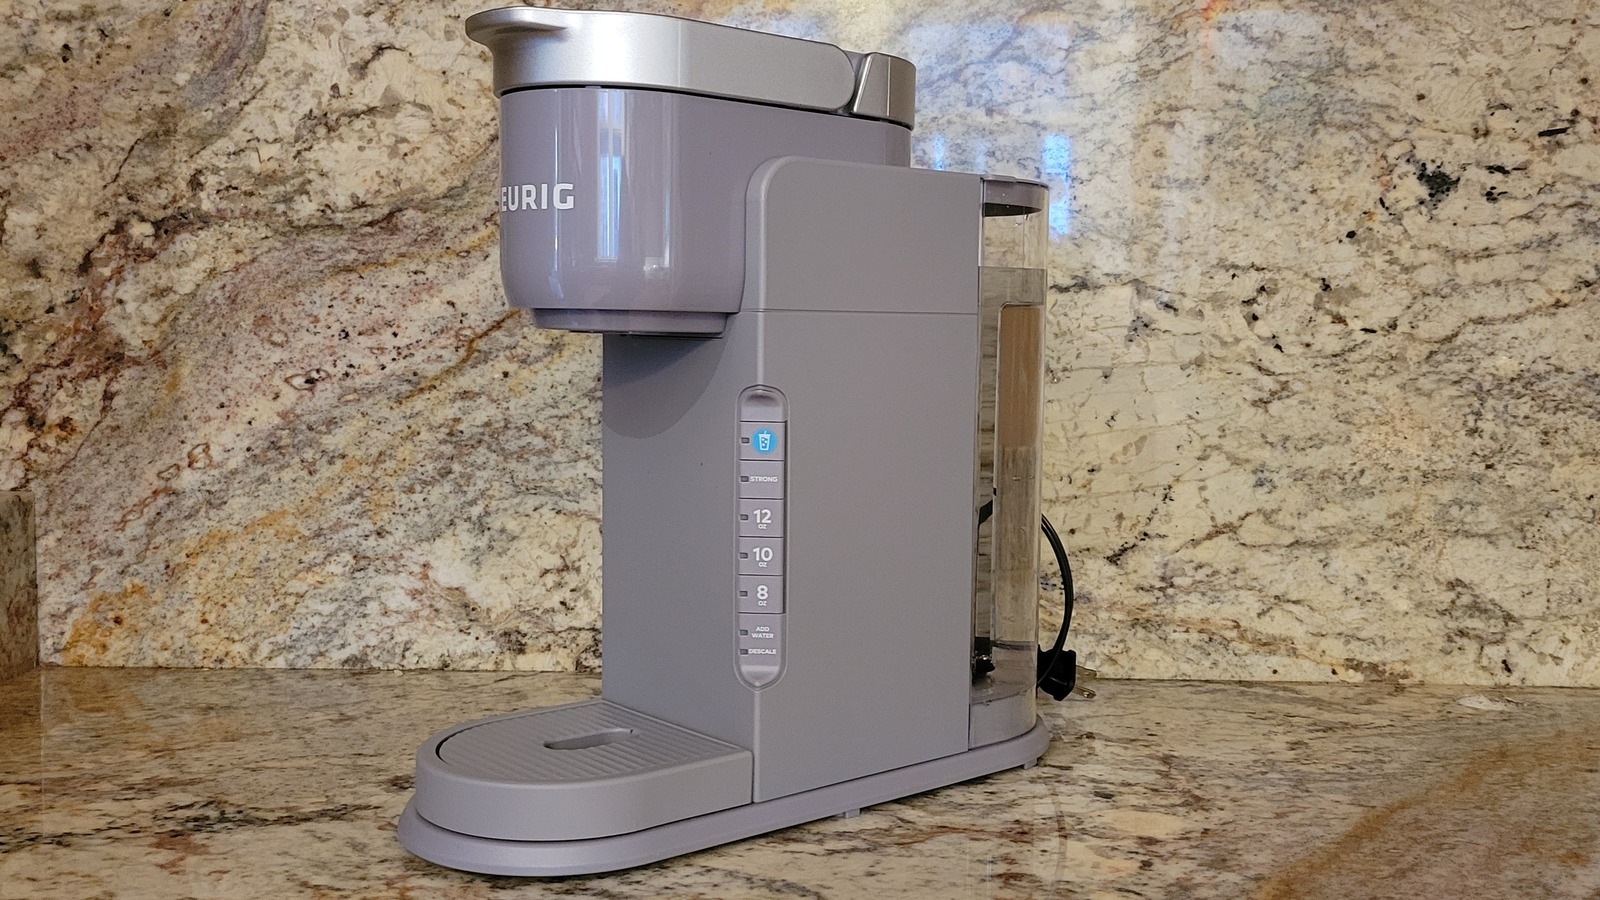 https://www.tastingtable.com/img/gallery/review-the-keurig-k-iced-coffee-maker-is-a-cool-addition-to-your-morning-routine/l-intro-1693946312.jpg